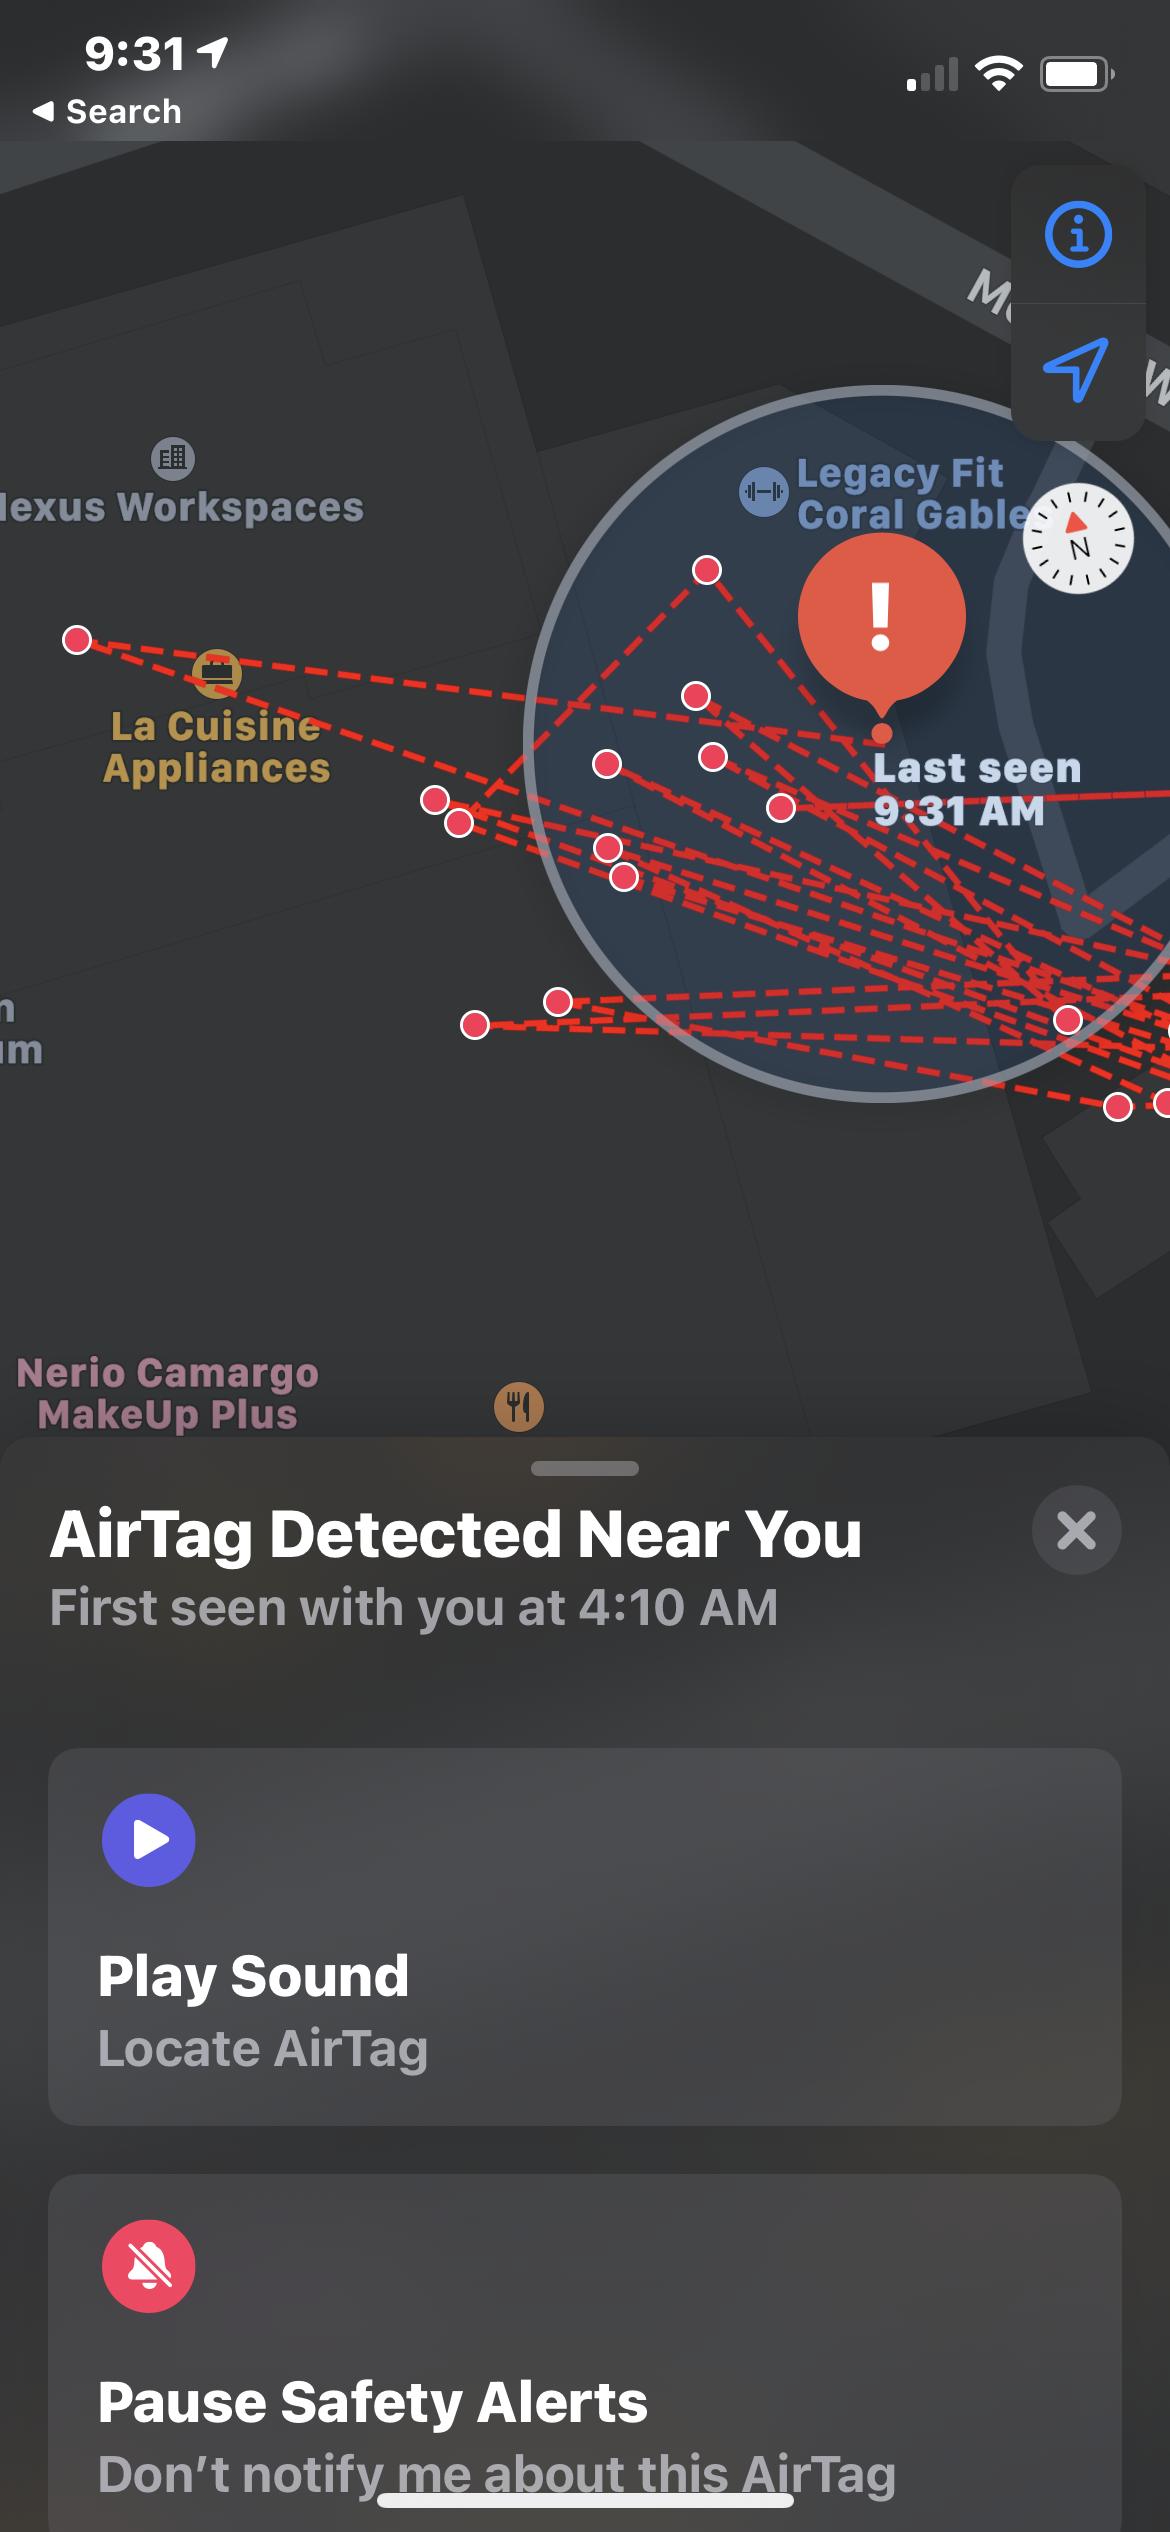 What to do if you get an alert that an AirTag, Find My network